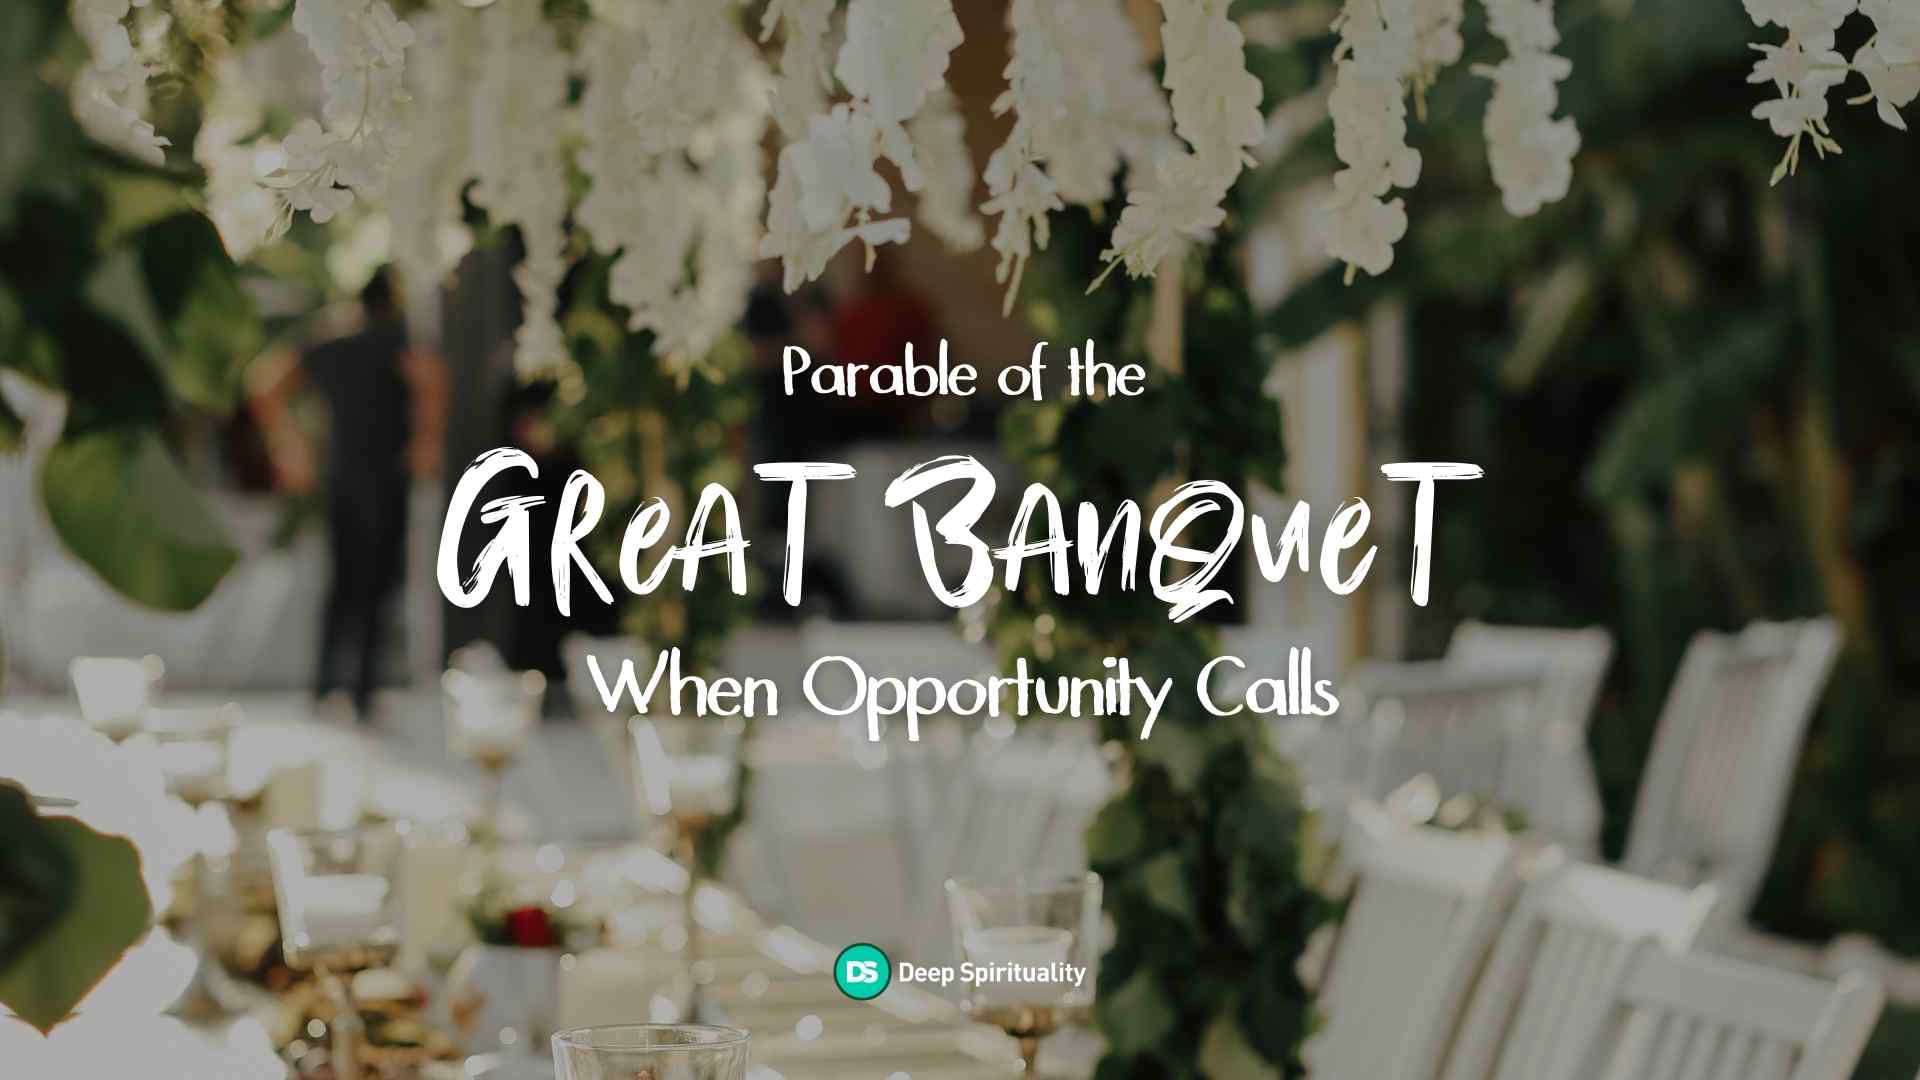 Parable of the Great Banquet: When Opportunity Calls 2